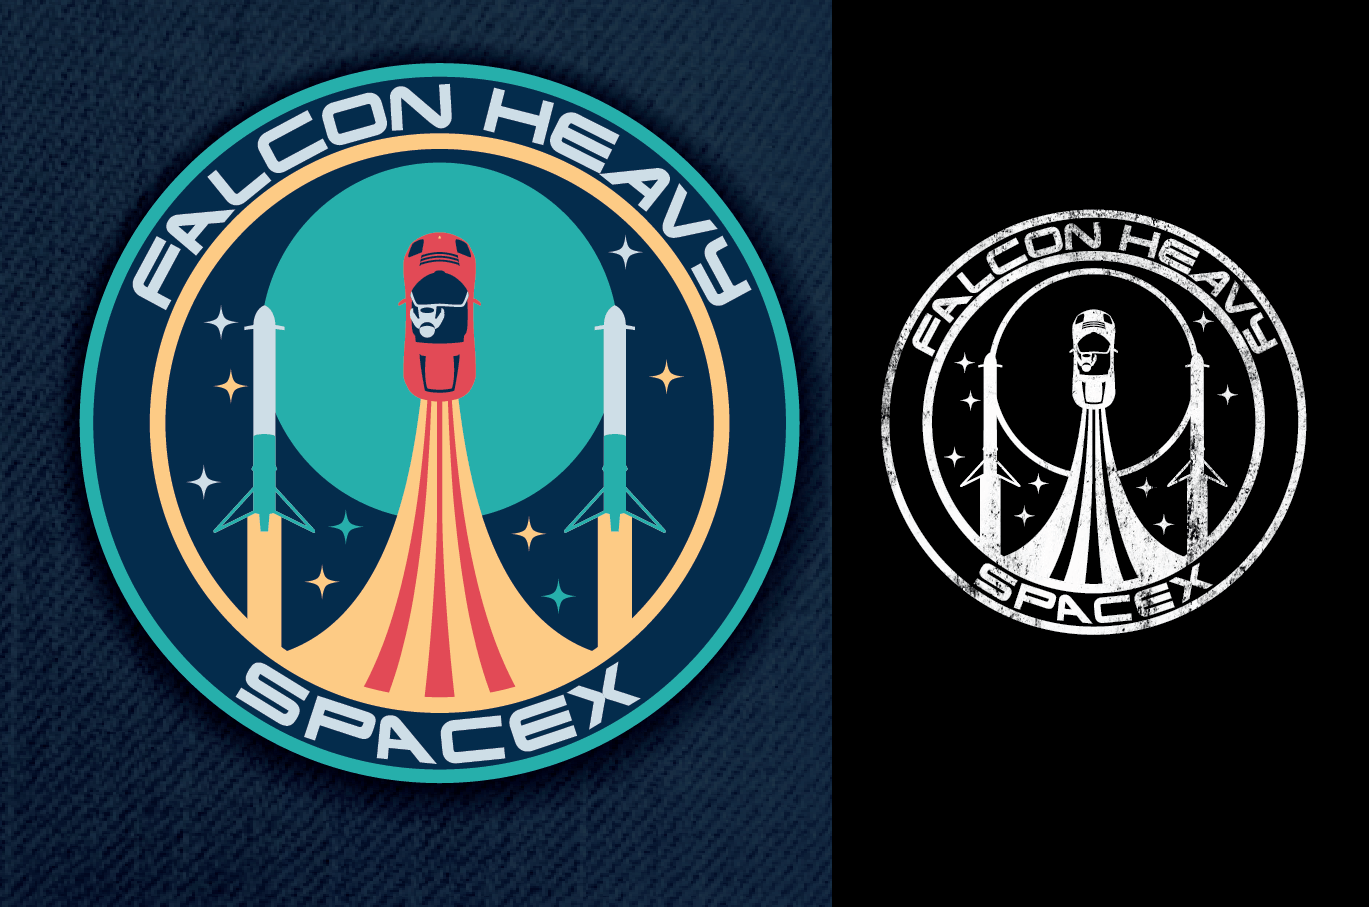 Falcon Heavy SpaceX Logo - SpaceX Falcon patch and tshirt concept - Album on Imgur